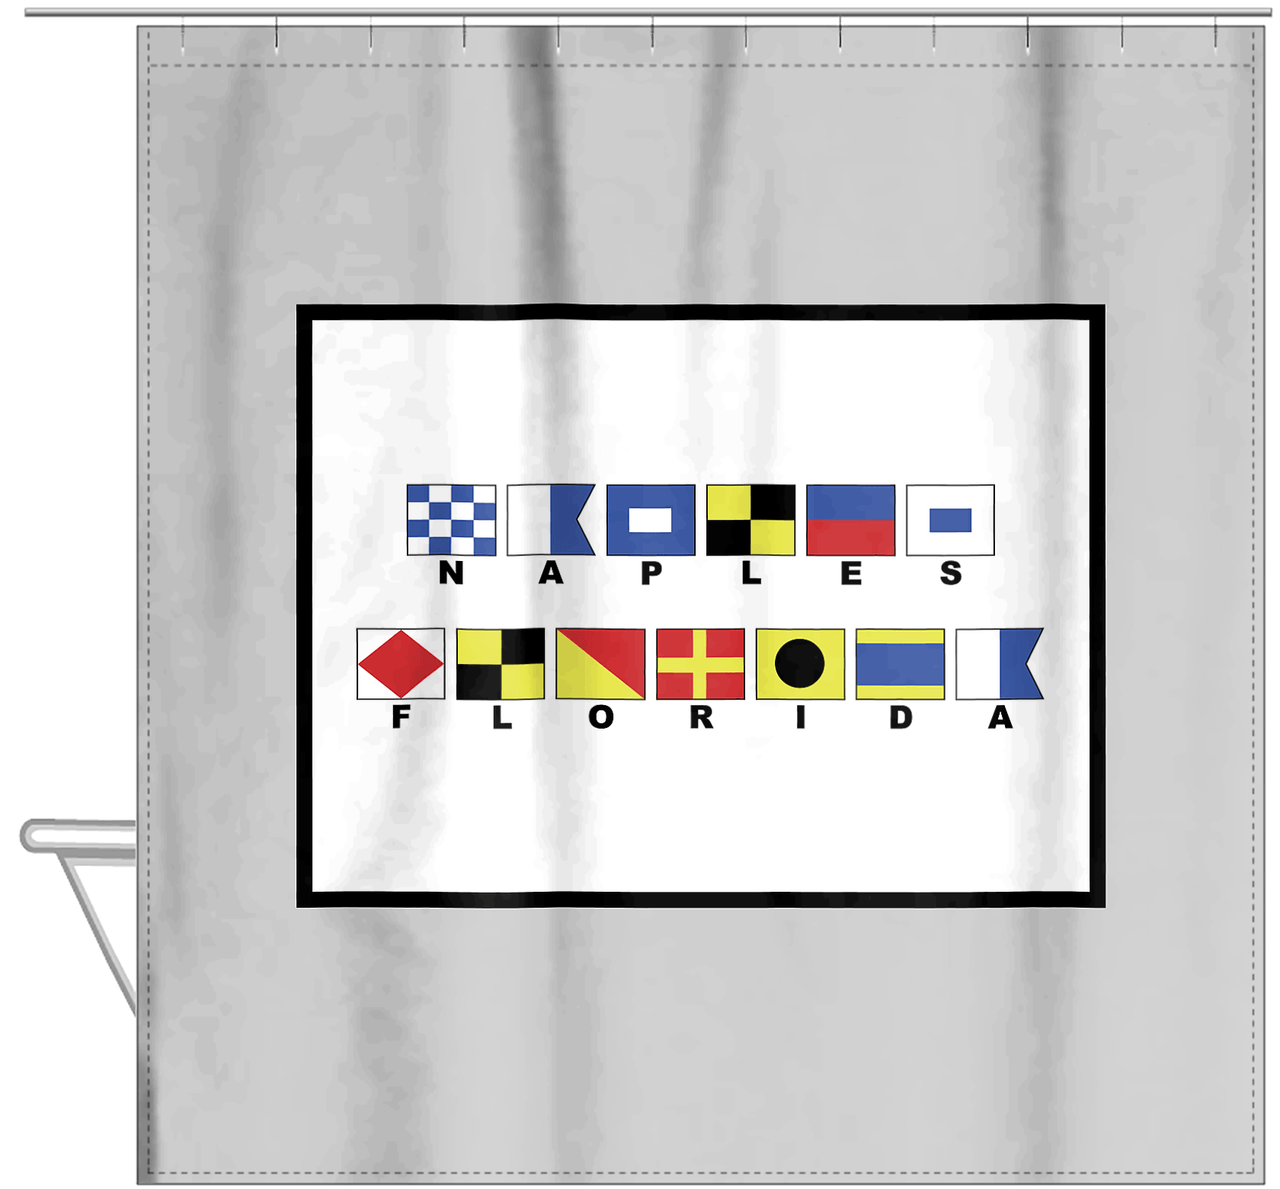 Personalized Nautical Flags Shower Curtain - Grey and Black - Flags With Small Letters - Hanging View